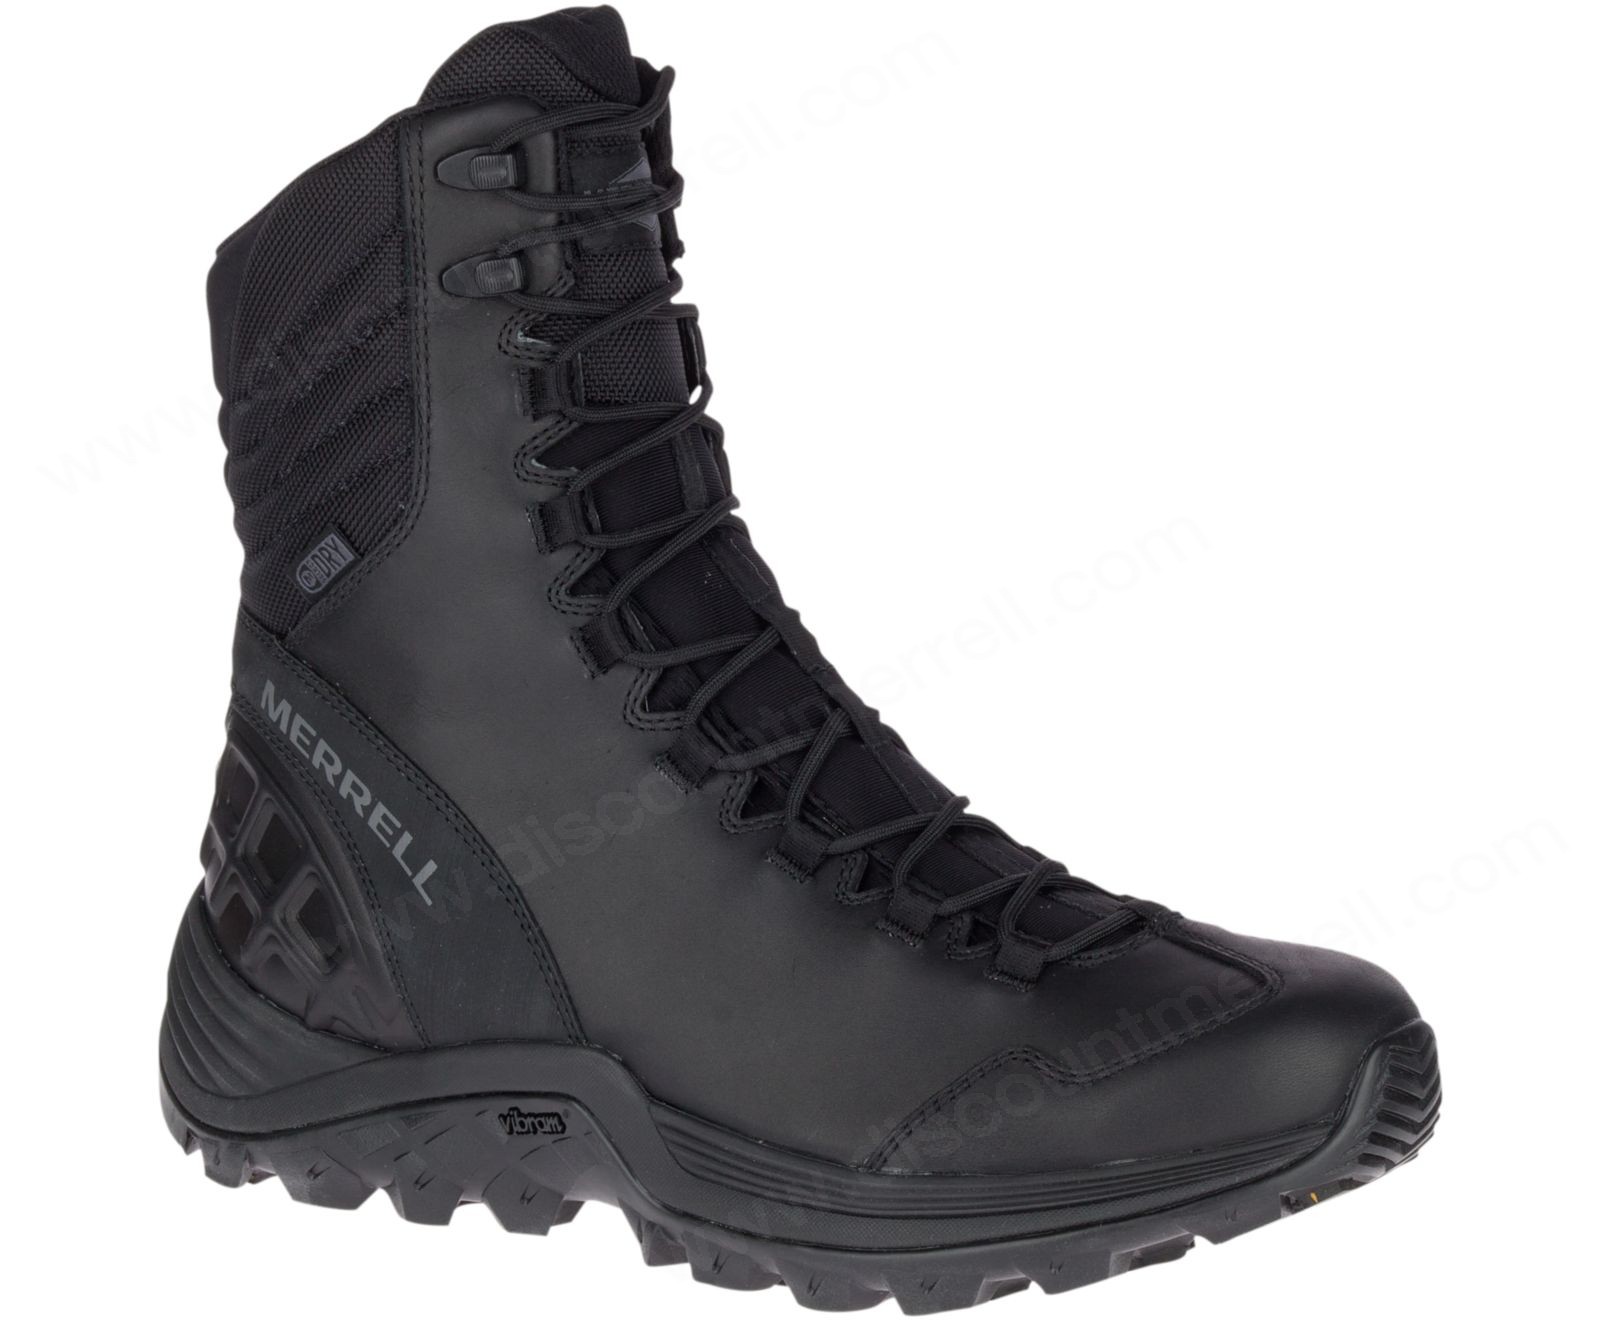 Merrell - Thermo Rogue Tactical Waterproof Ice+ - Merrell - Thermo Rogue Tactical Waterproof Ice+